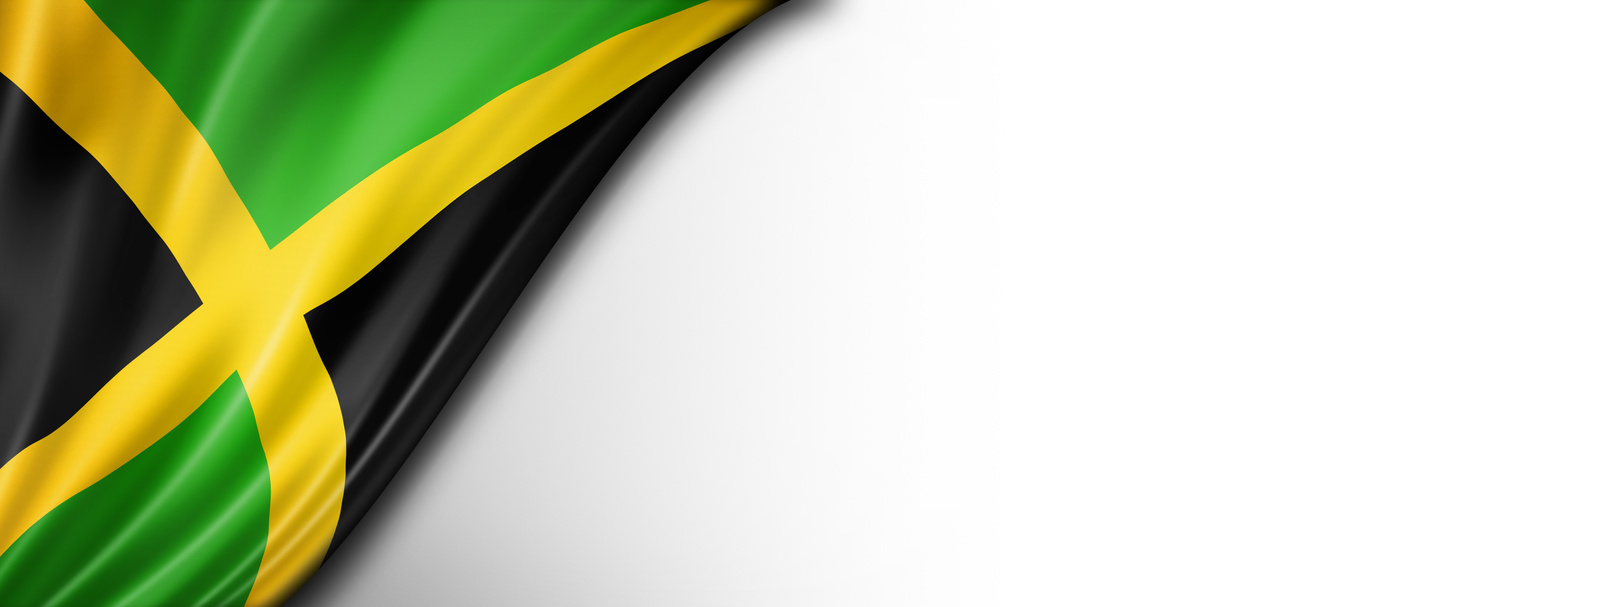 Jamaican Flag Isolated on White Banner